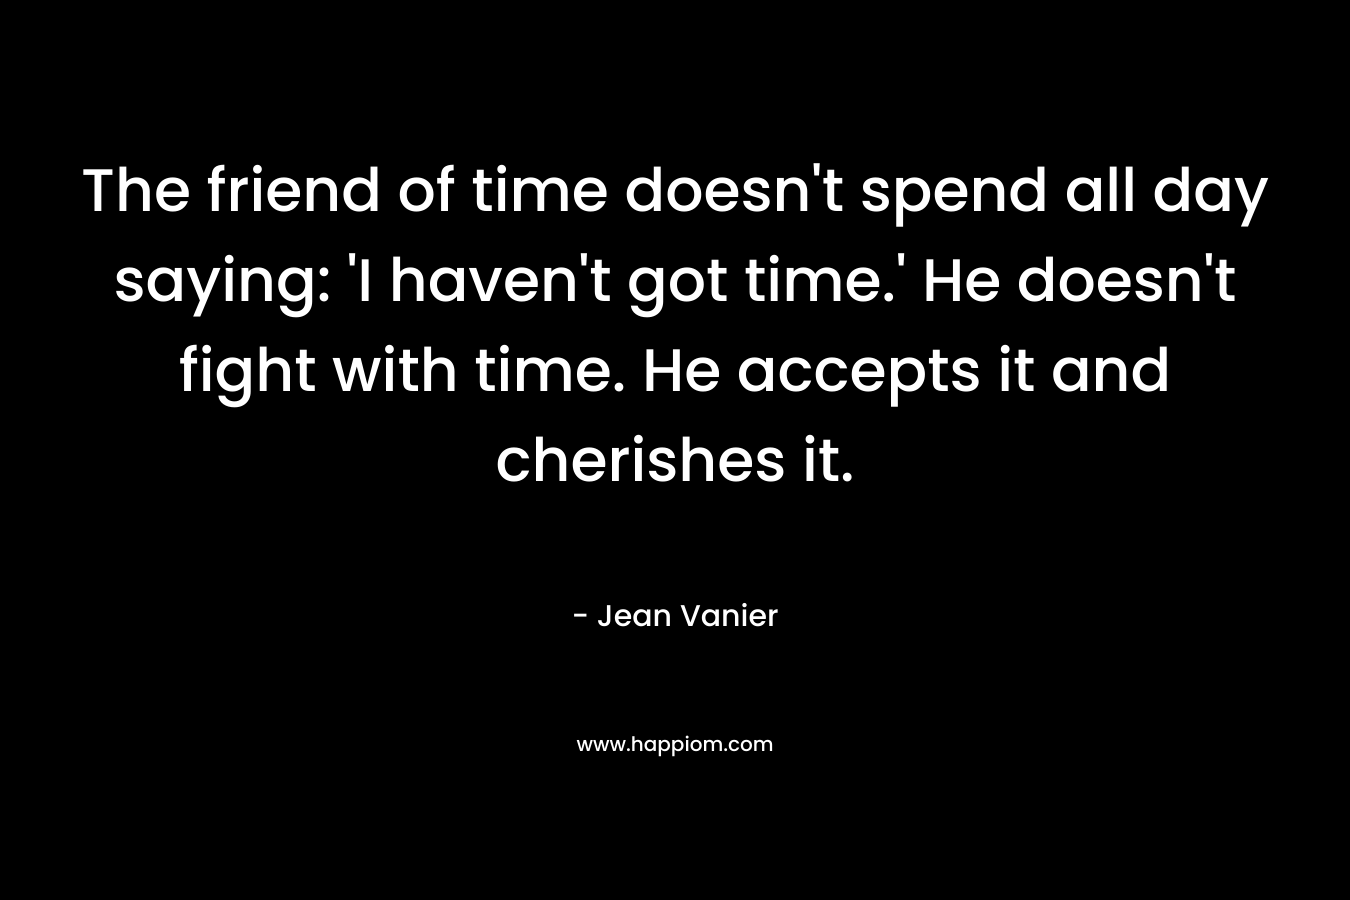 The friend of time doesn't spend all day saying: 'I haven't got time.' He doesn't fight with time. He accepts it and cherishes it.